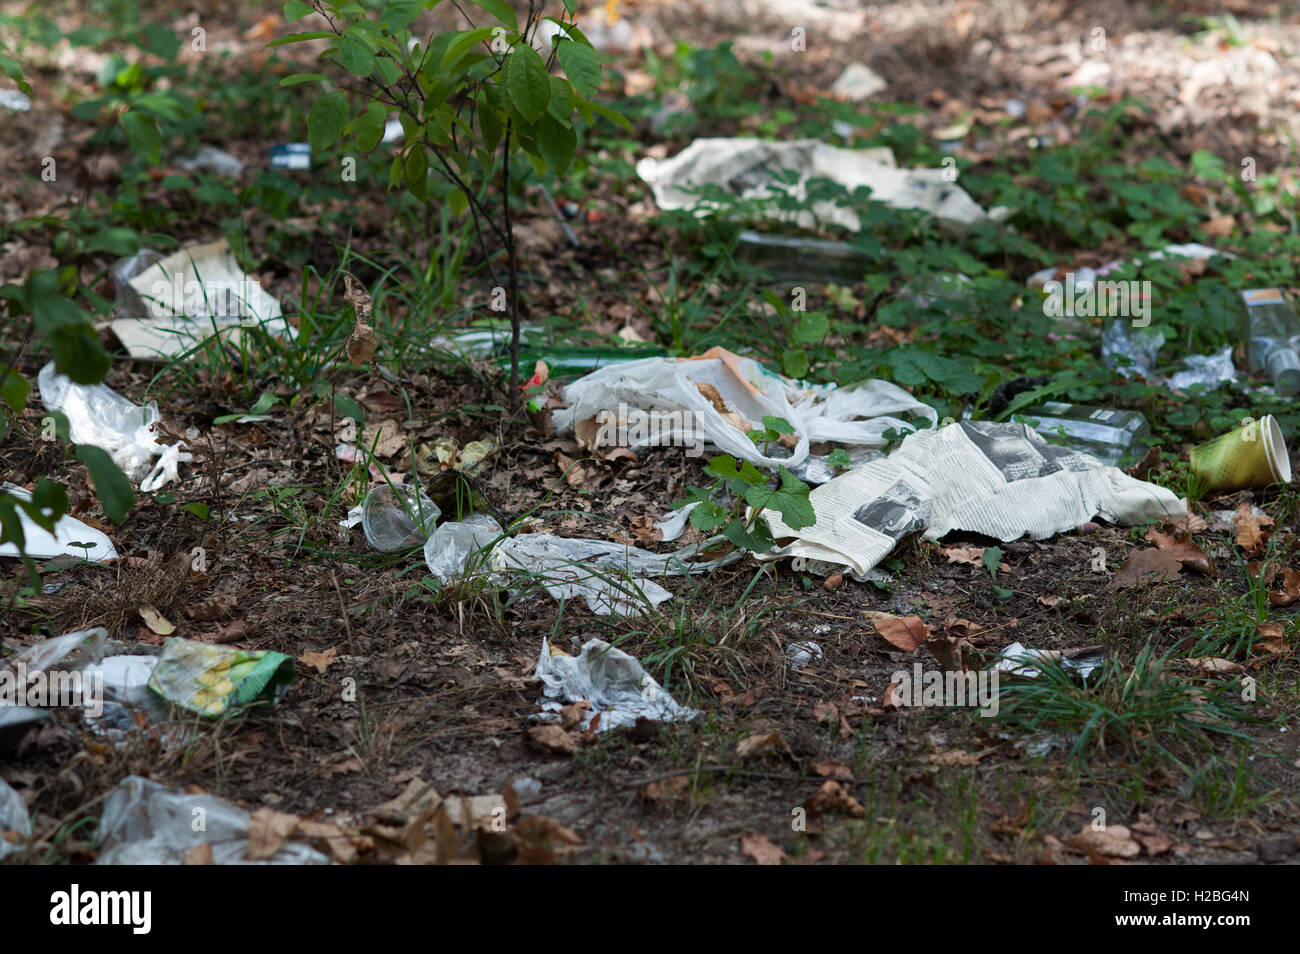 garbage dump in the woods problems of ecology Stock Photo